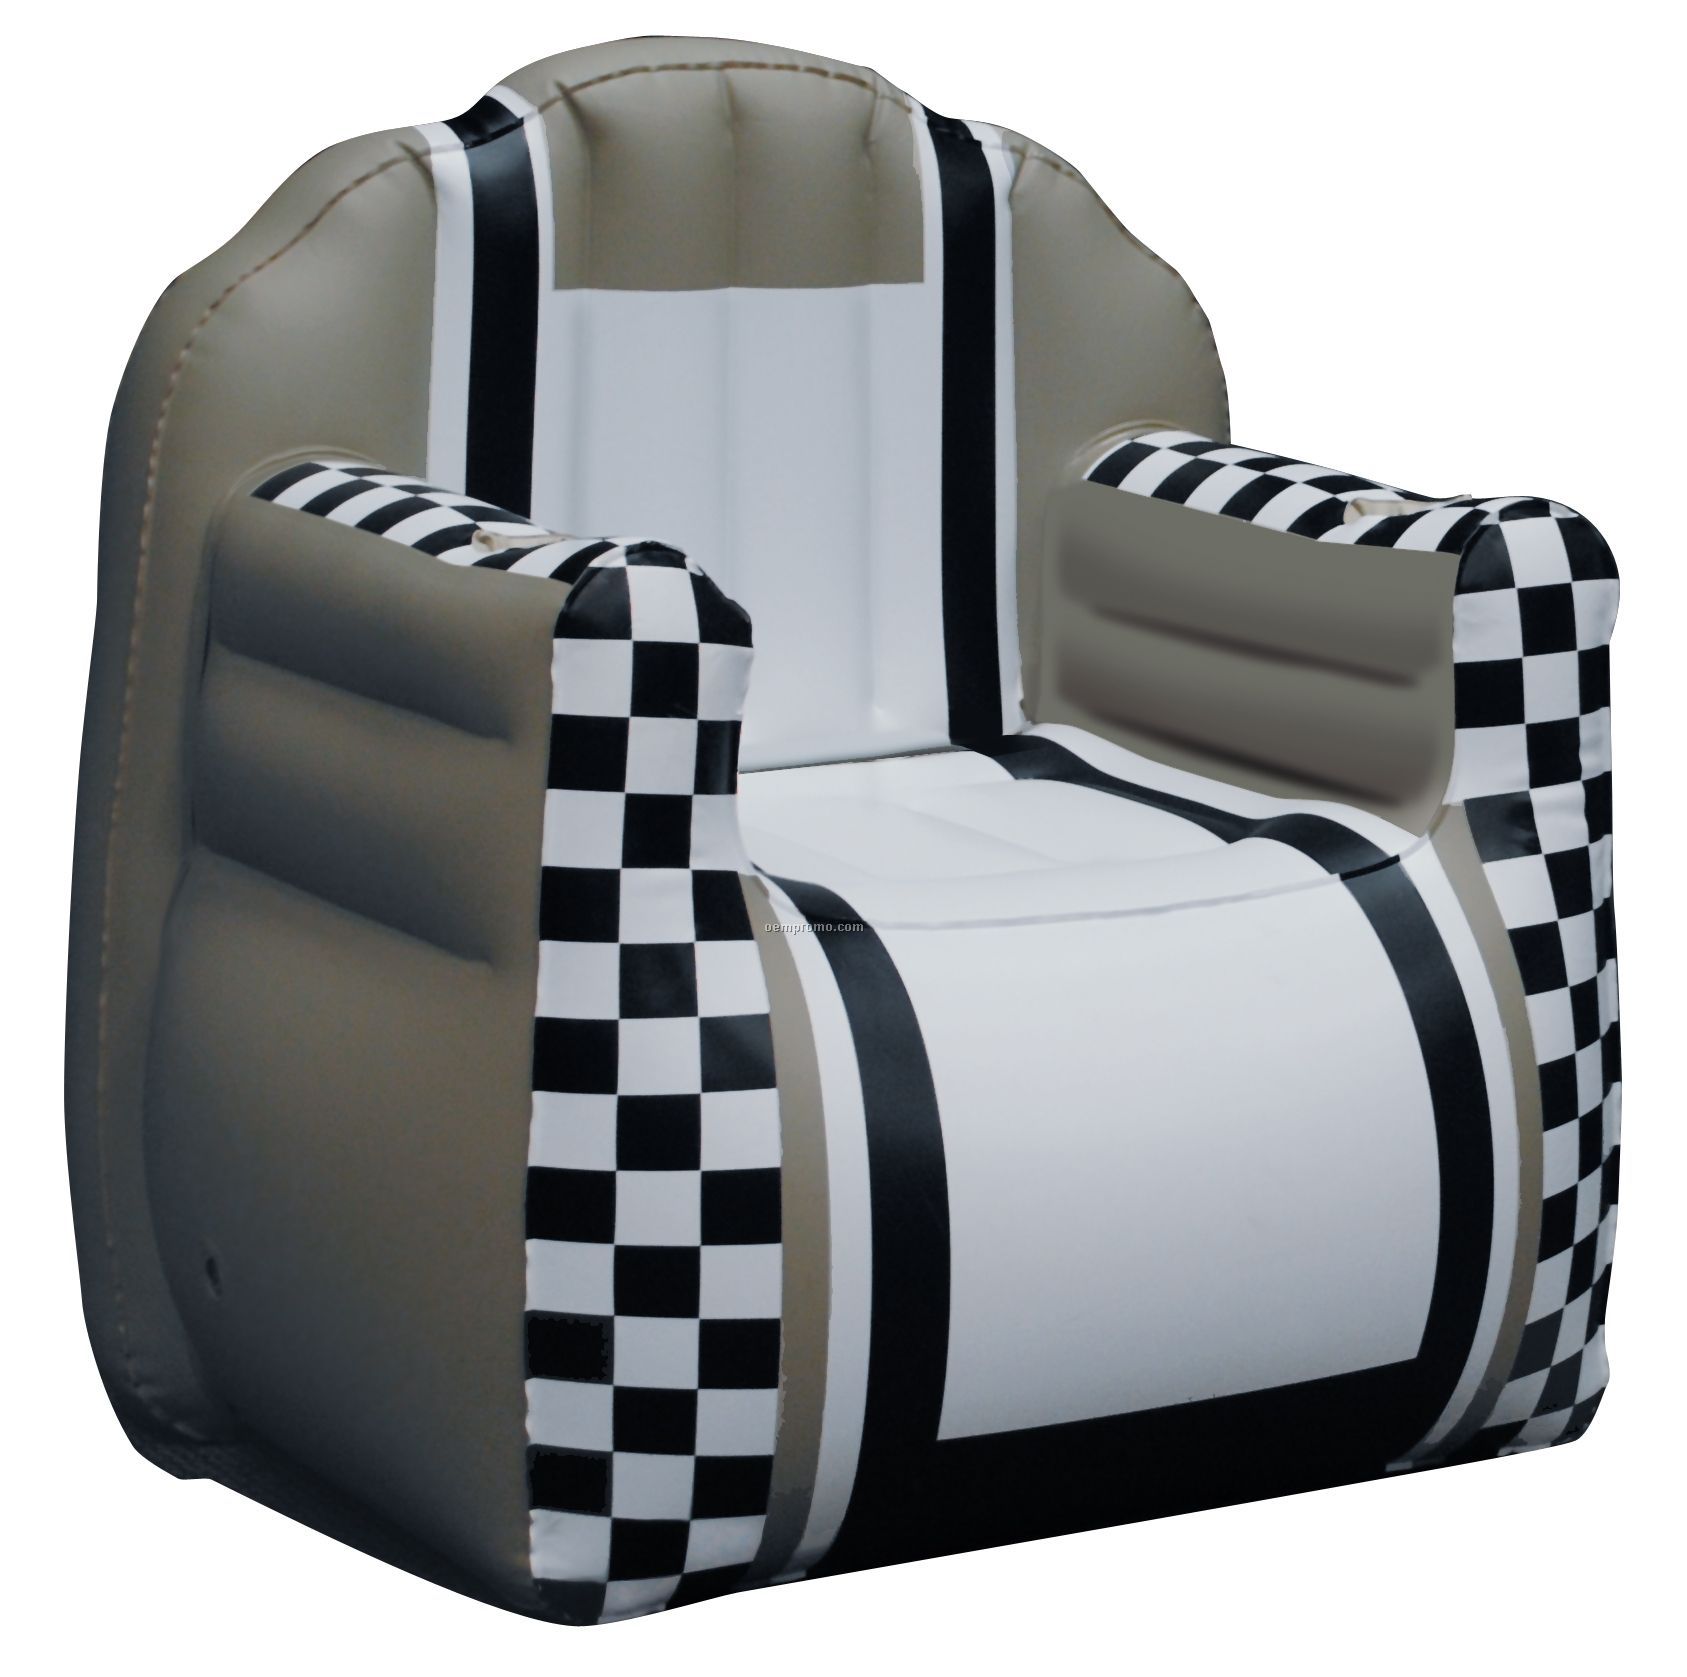 Inflate-a-seat "Chair": Gray/White/Black With Checkered Arms